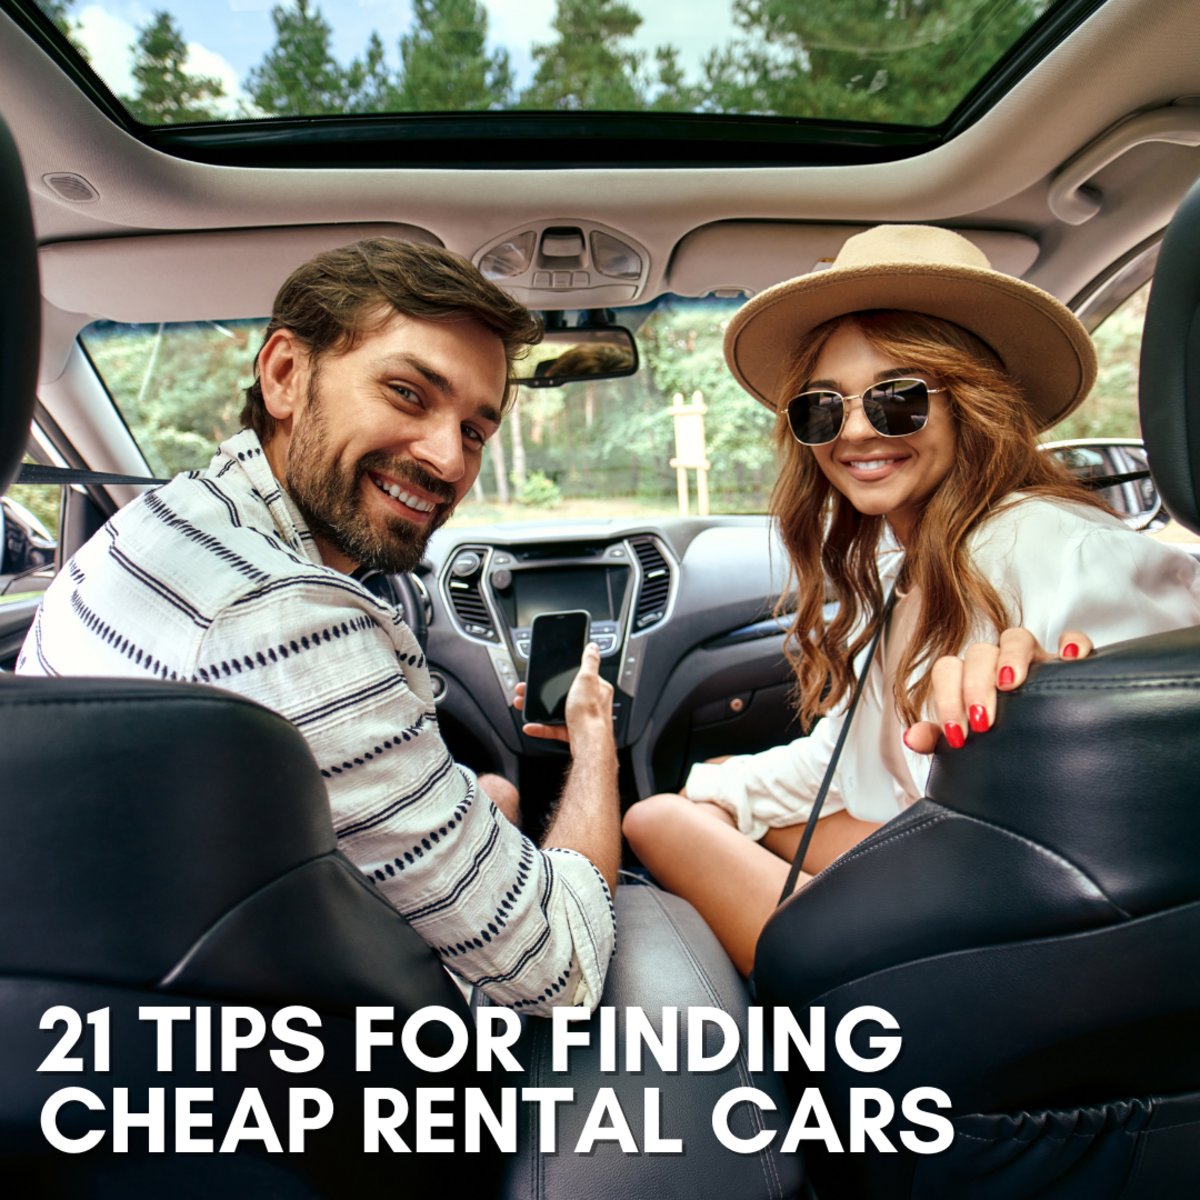 Planning on hitting the open road on your way to South Burlington? 🚗 Read these 21 tips for scoring sweet deals on #rentalcars so that you can explore without breaking the bank. bit.ly/3uBCqBJ #roadtrip #savvytraveler